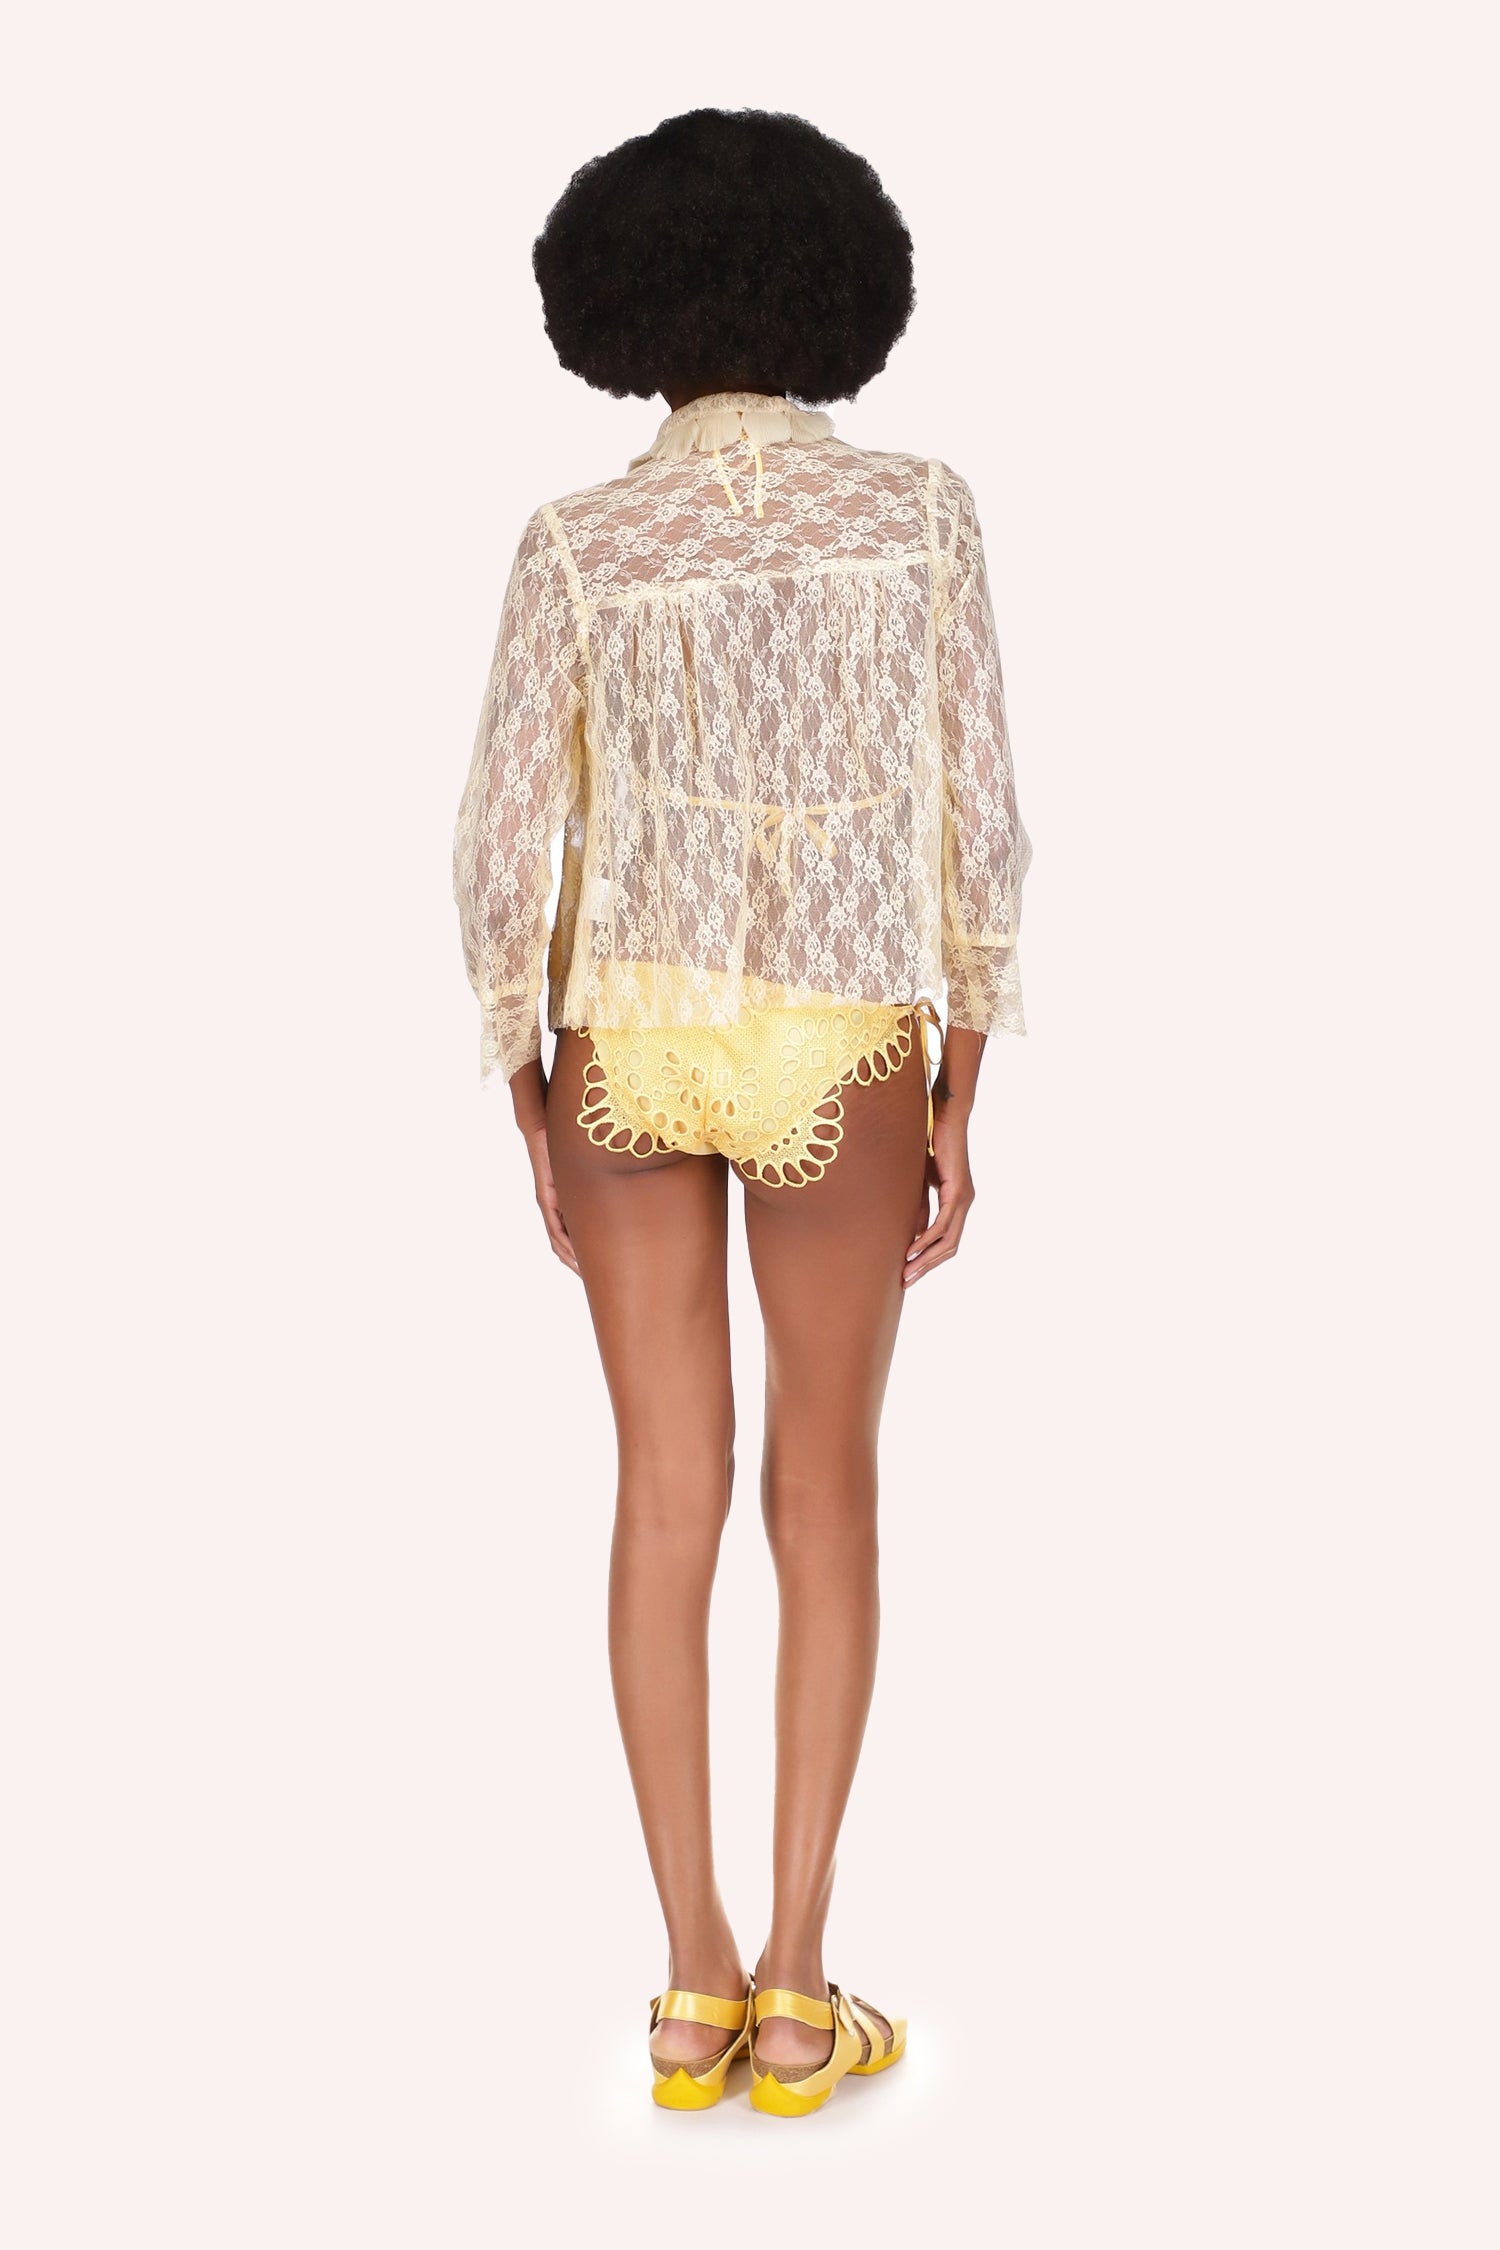 Arcadia Blossom Lace, see-thru off-white, Hips long, long sleeves, hems in plain off-white